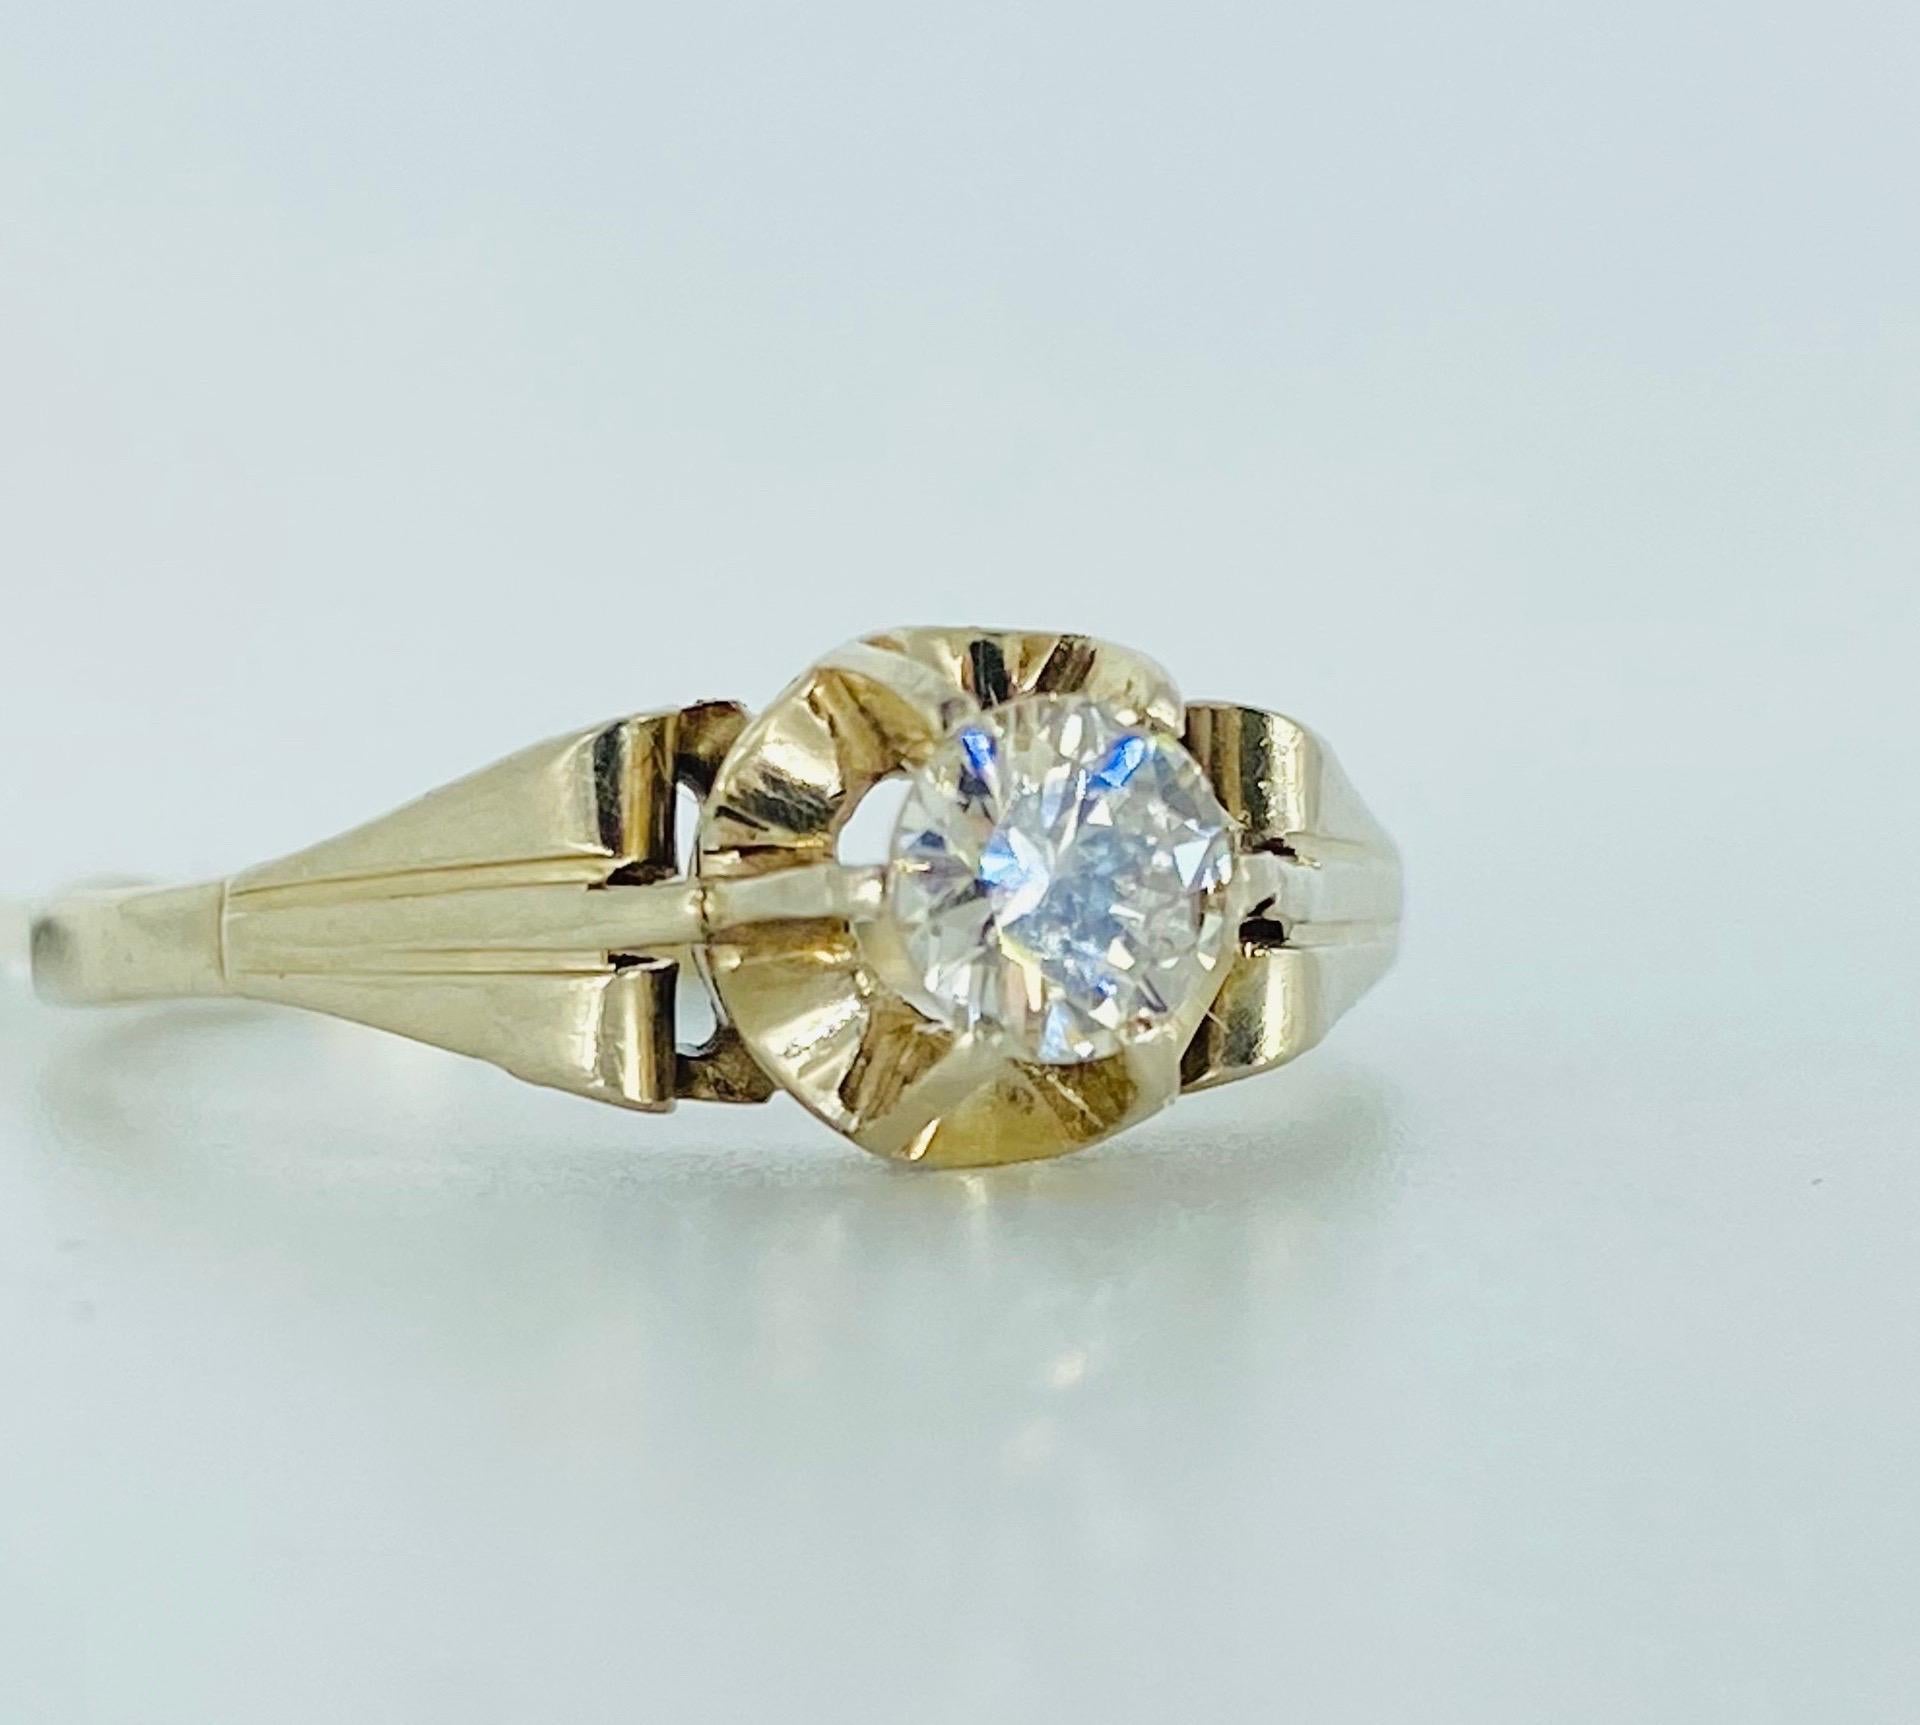 Vintage GIA Certified 0.40 Carat Round Diamond Engagement Ring 14k White Gold In Good Condition For Sale In Miami, FL